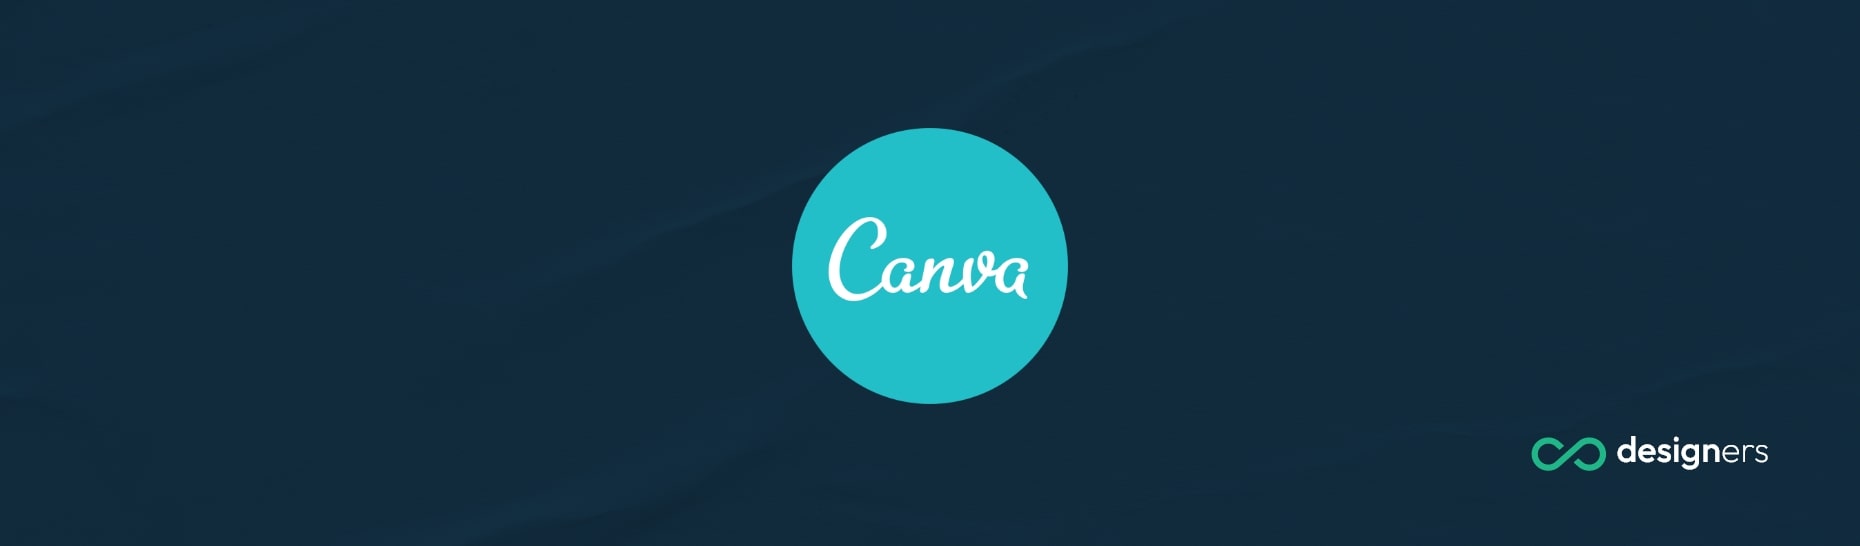 Does Canva Free Have Watermark?